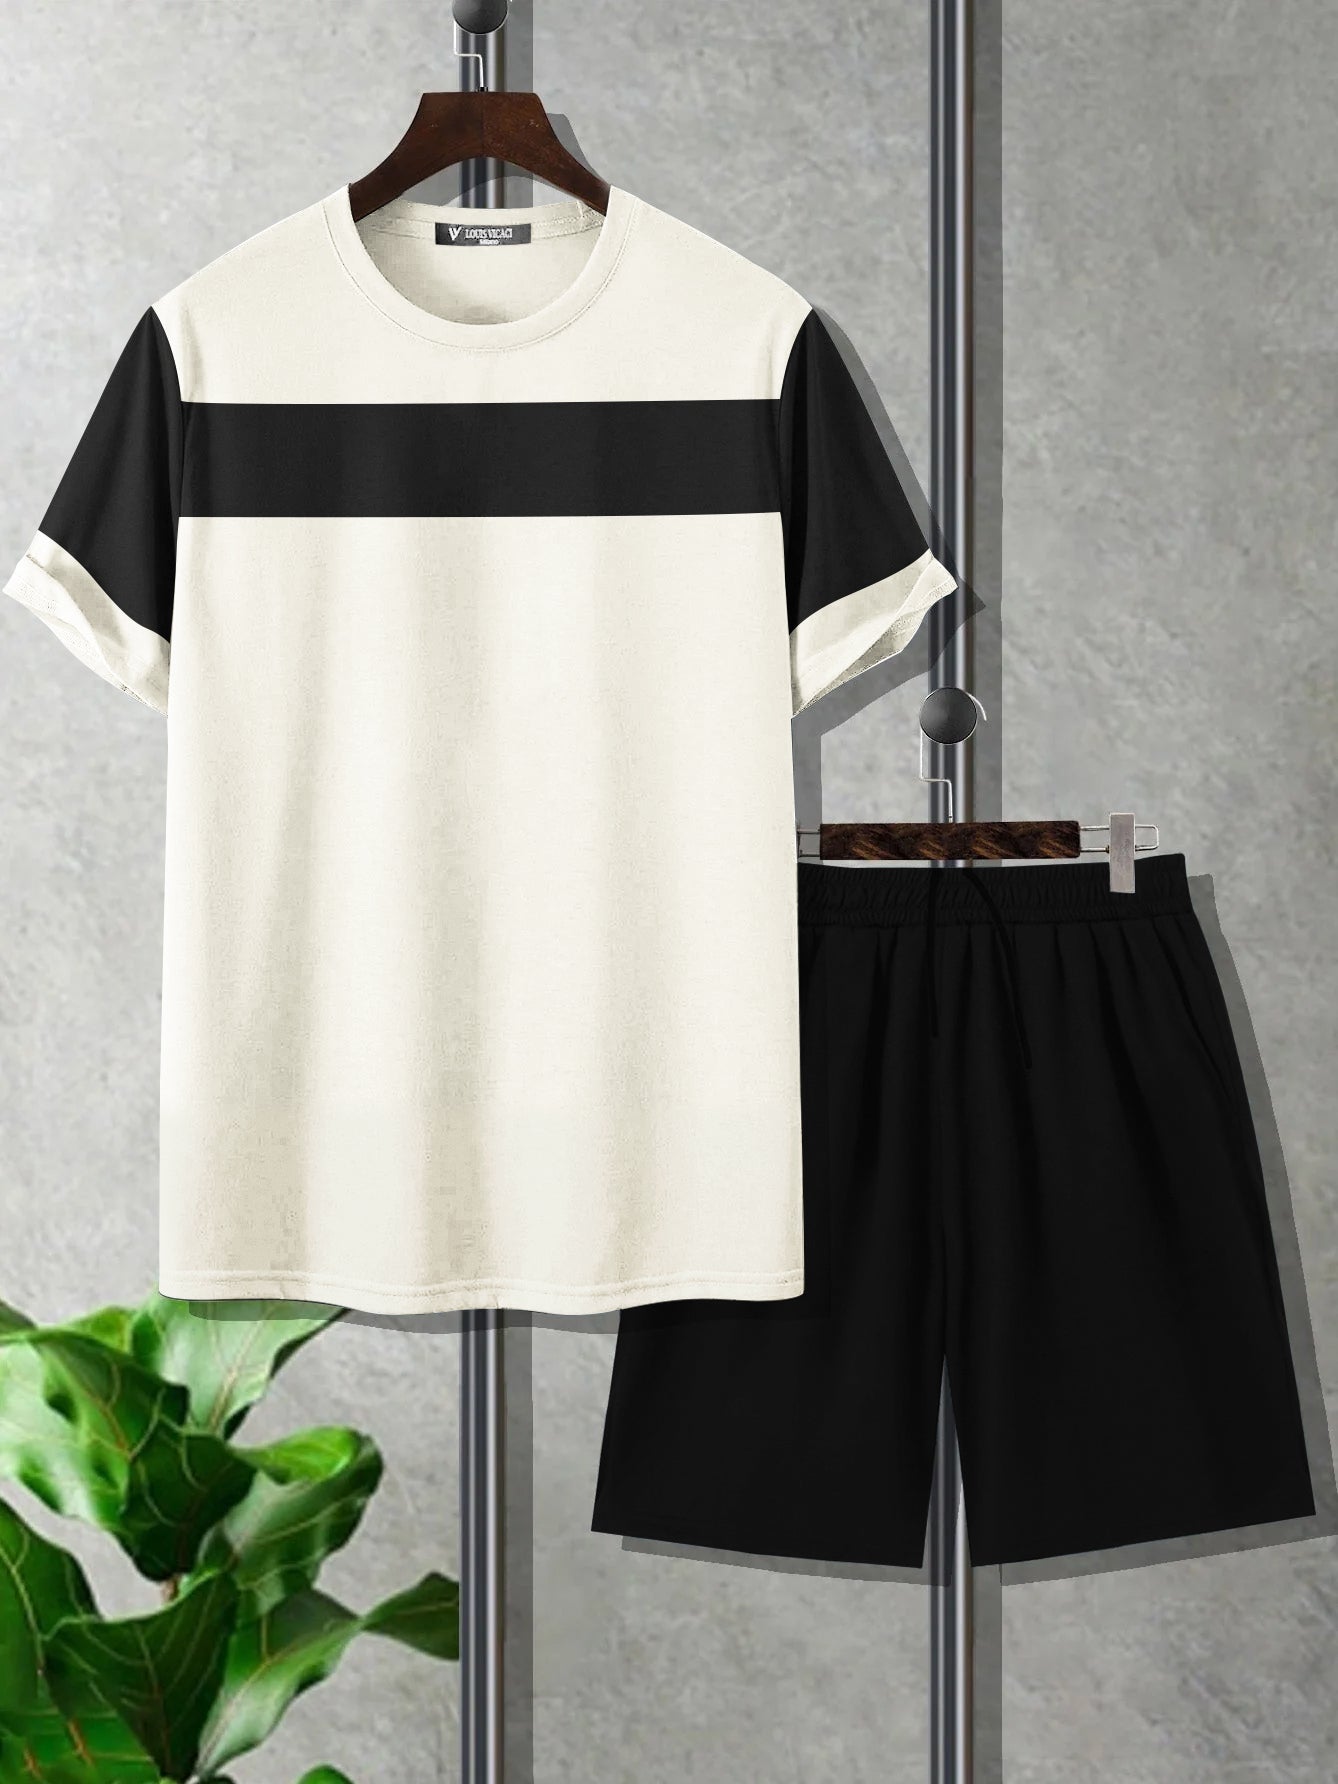 Summer Fashion T-Shirt & Lounge Short Suit For Men-Off White with Black-BR786